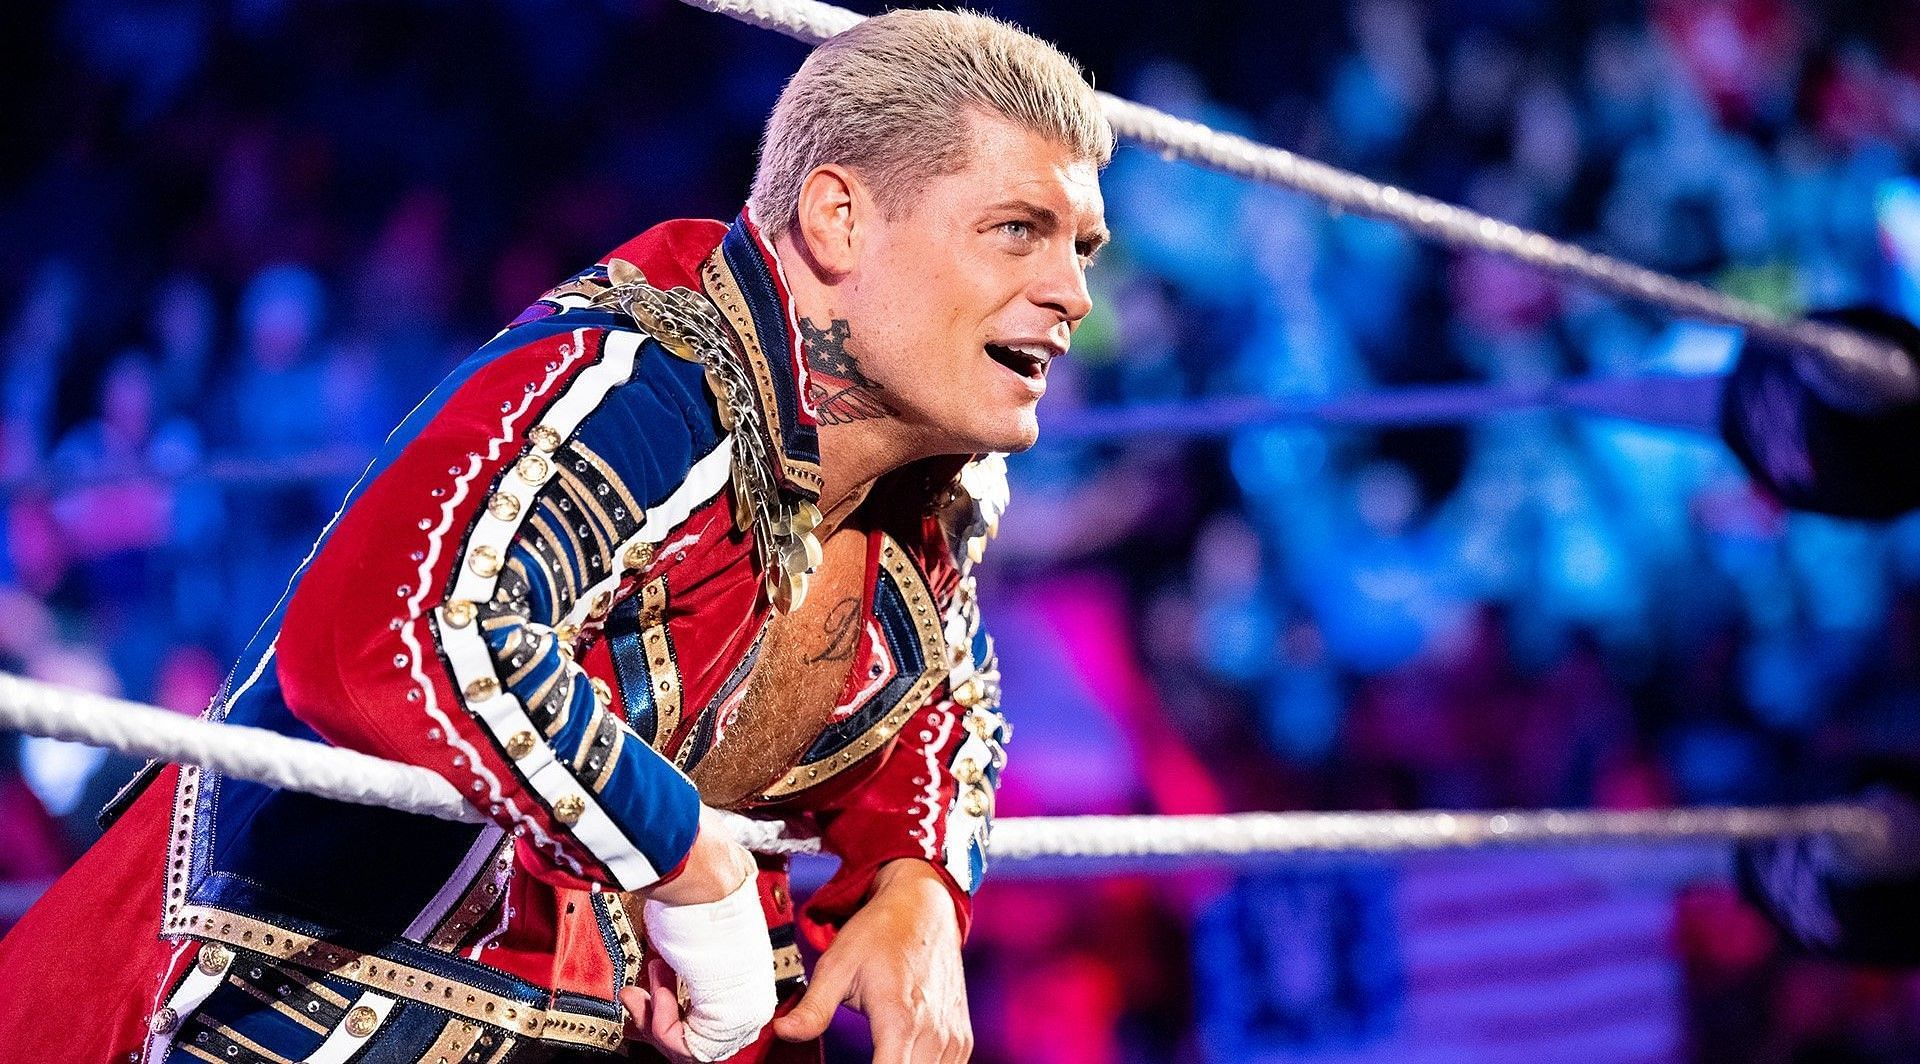 A former WWE Star commented on Cody Rhodes